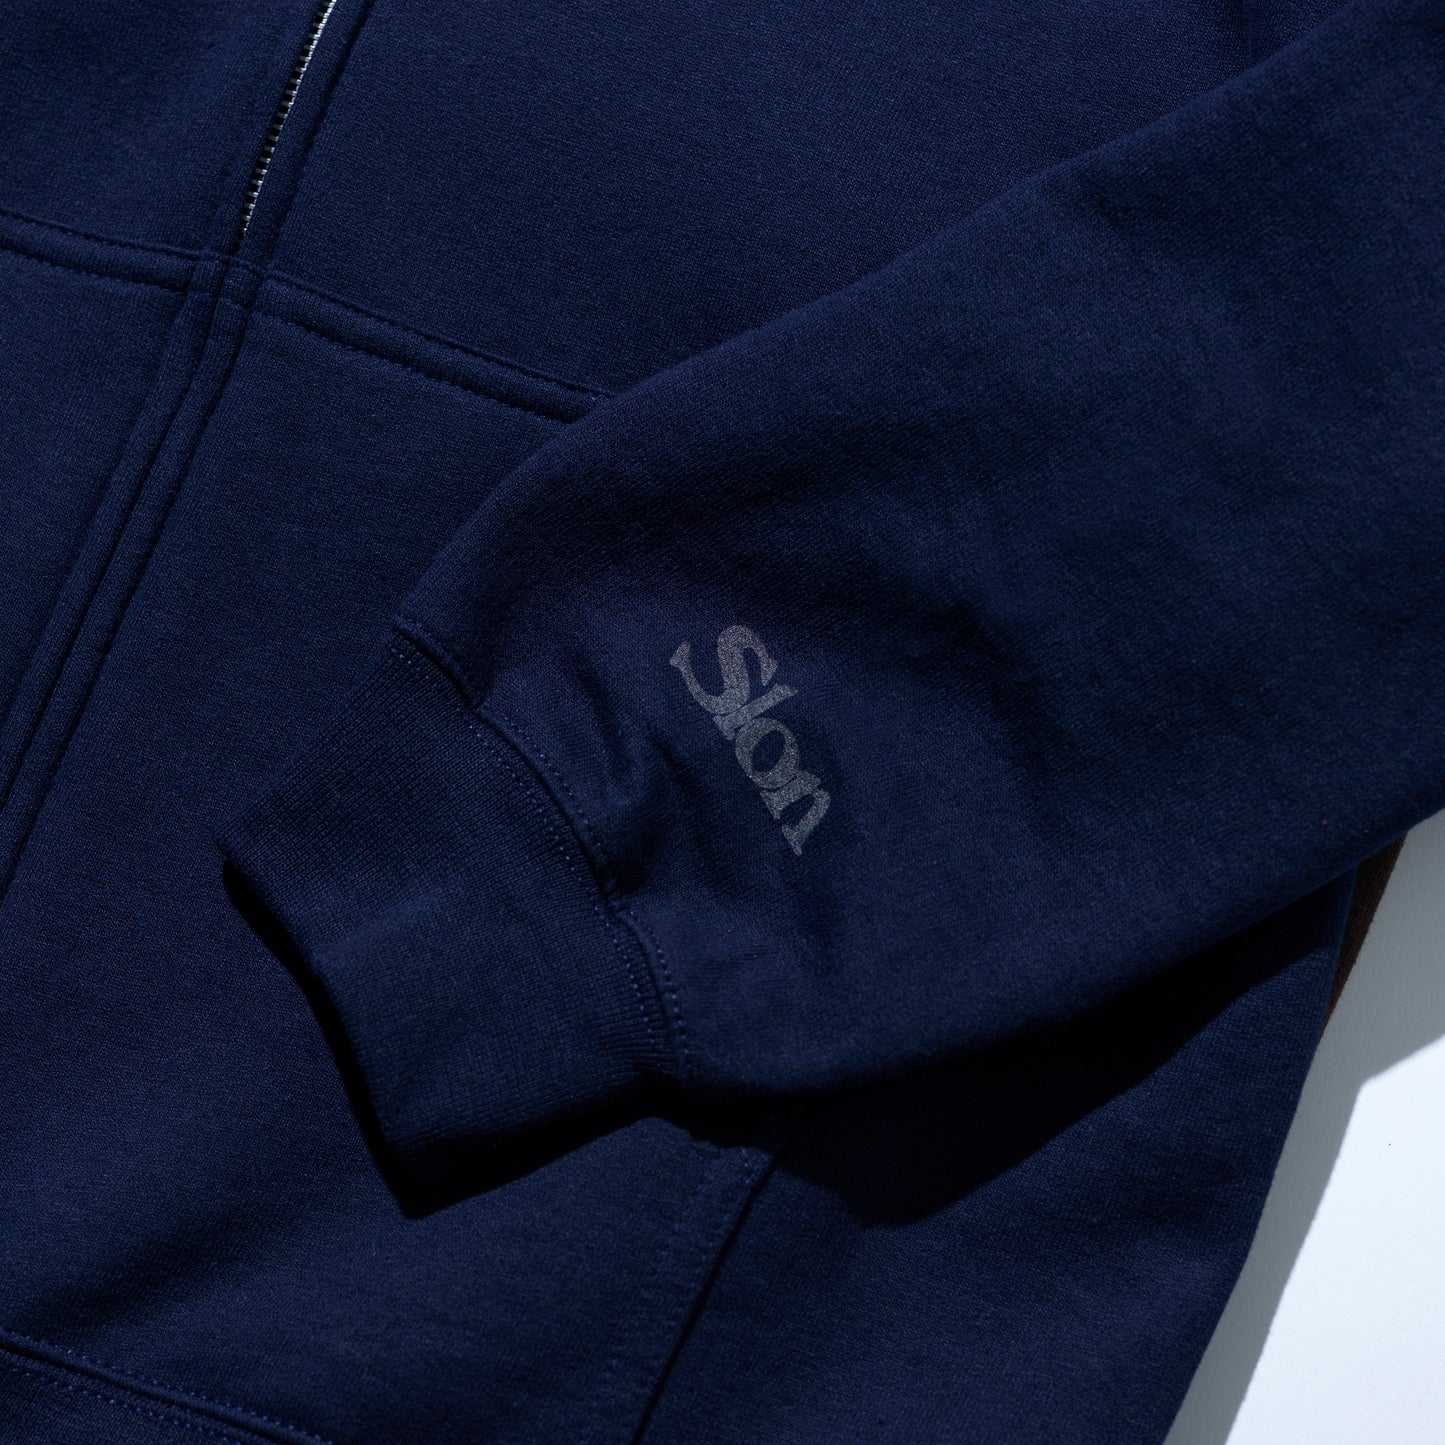 Slon NYC Dollar Stores Zip Hooded "Navy"